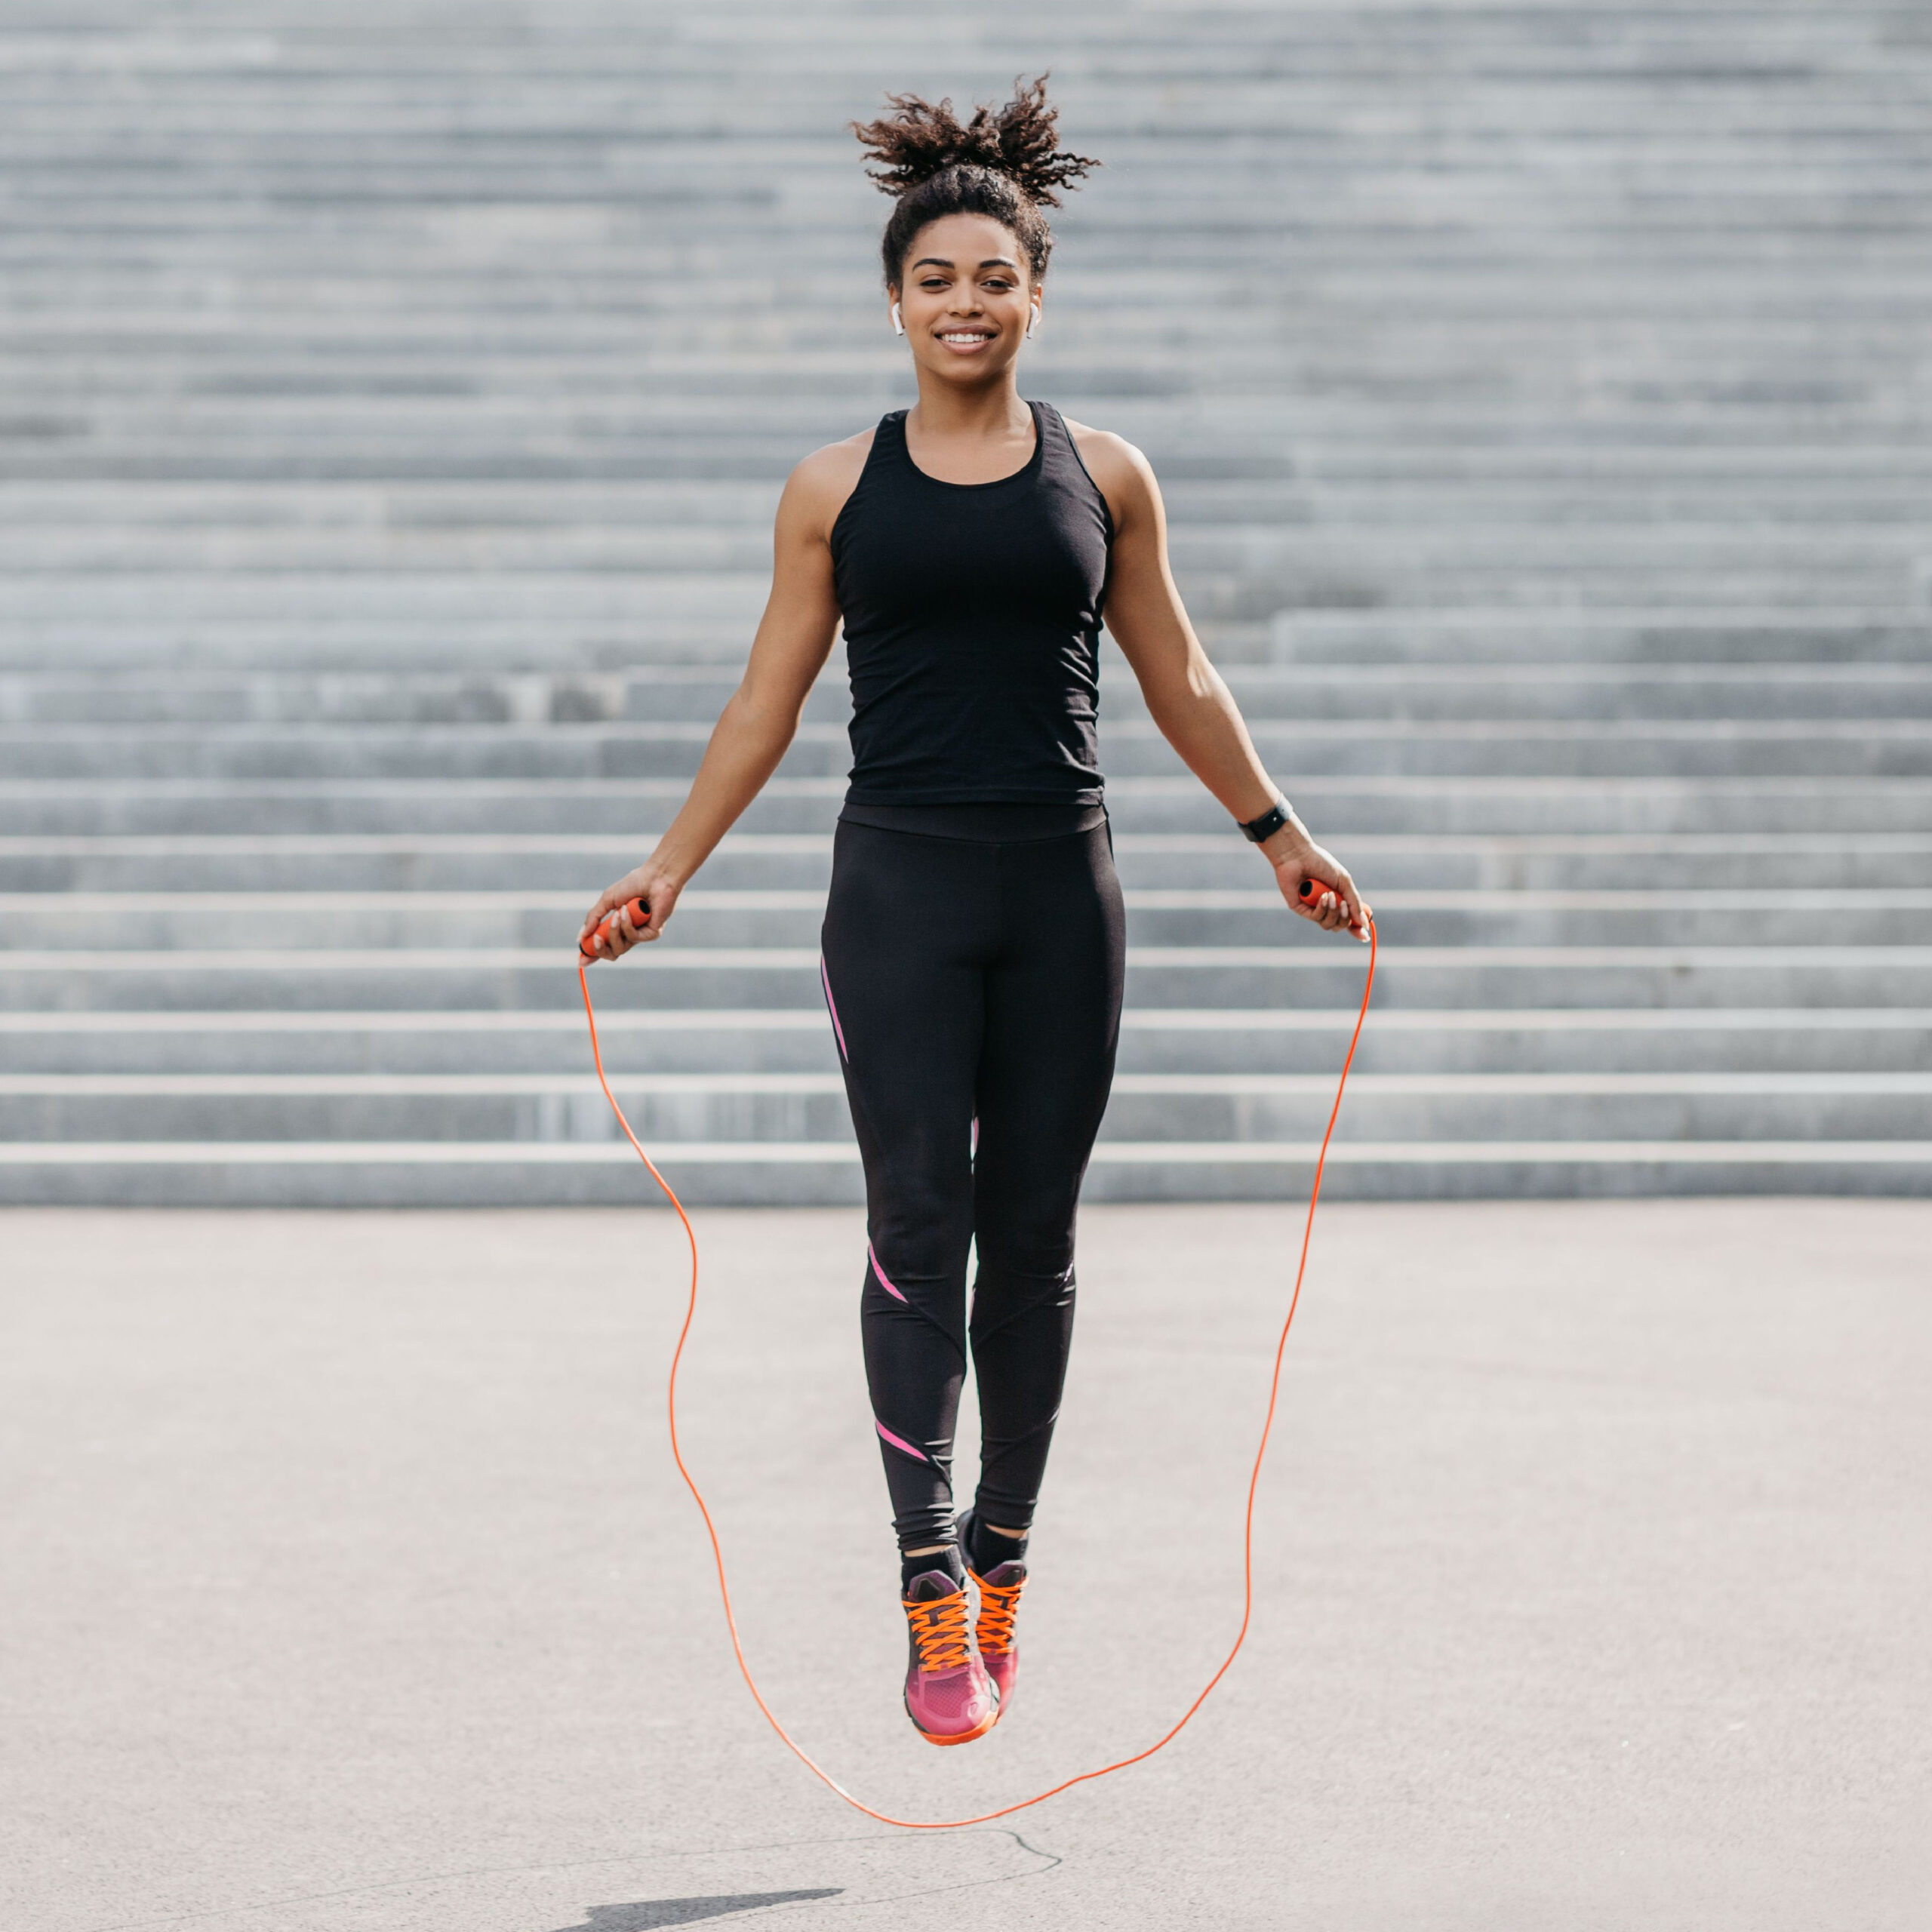 Benefits of Jumping Rope For Weight Loss, According To Personal Trainers -  SHEfinds